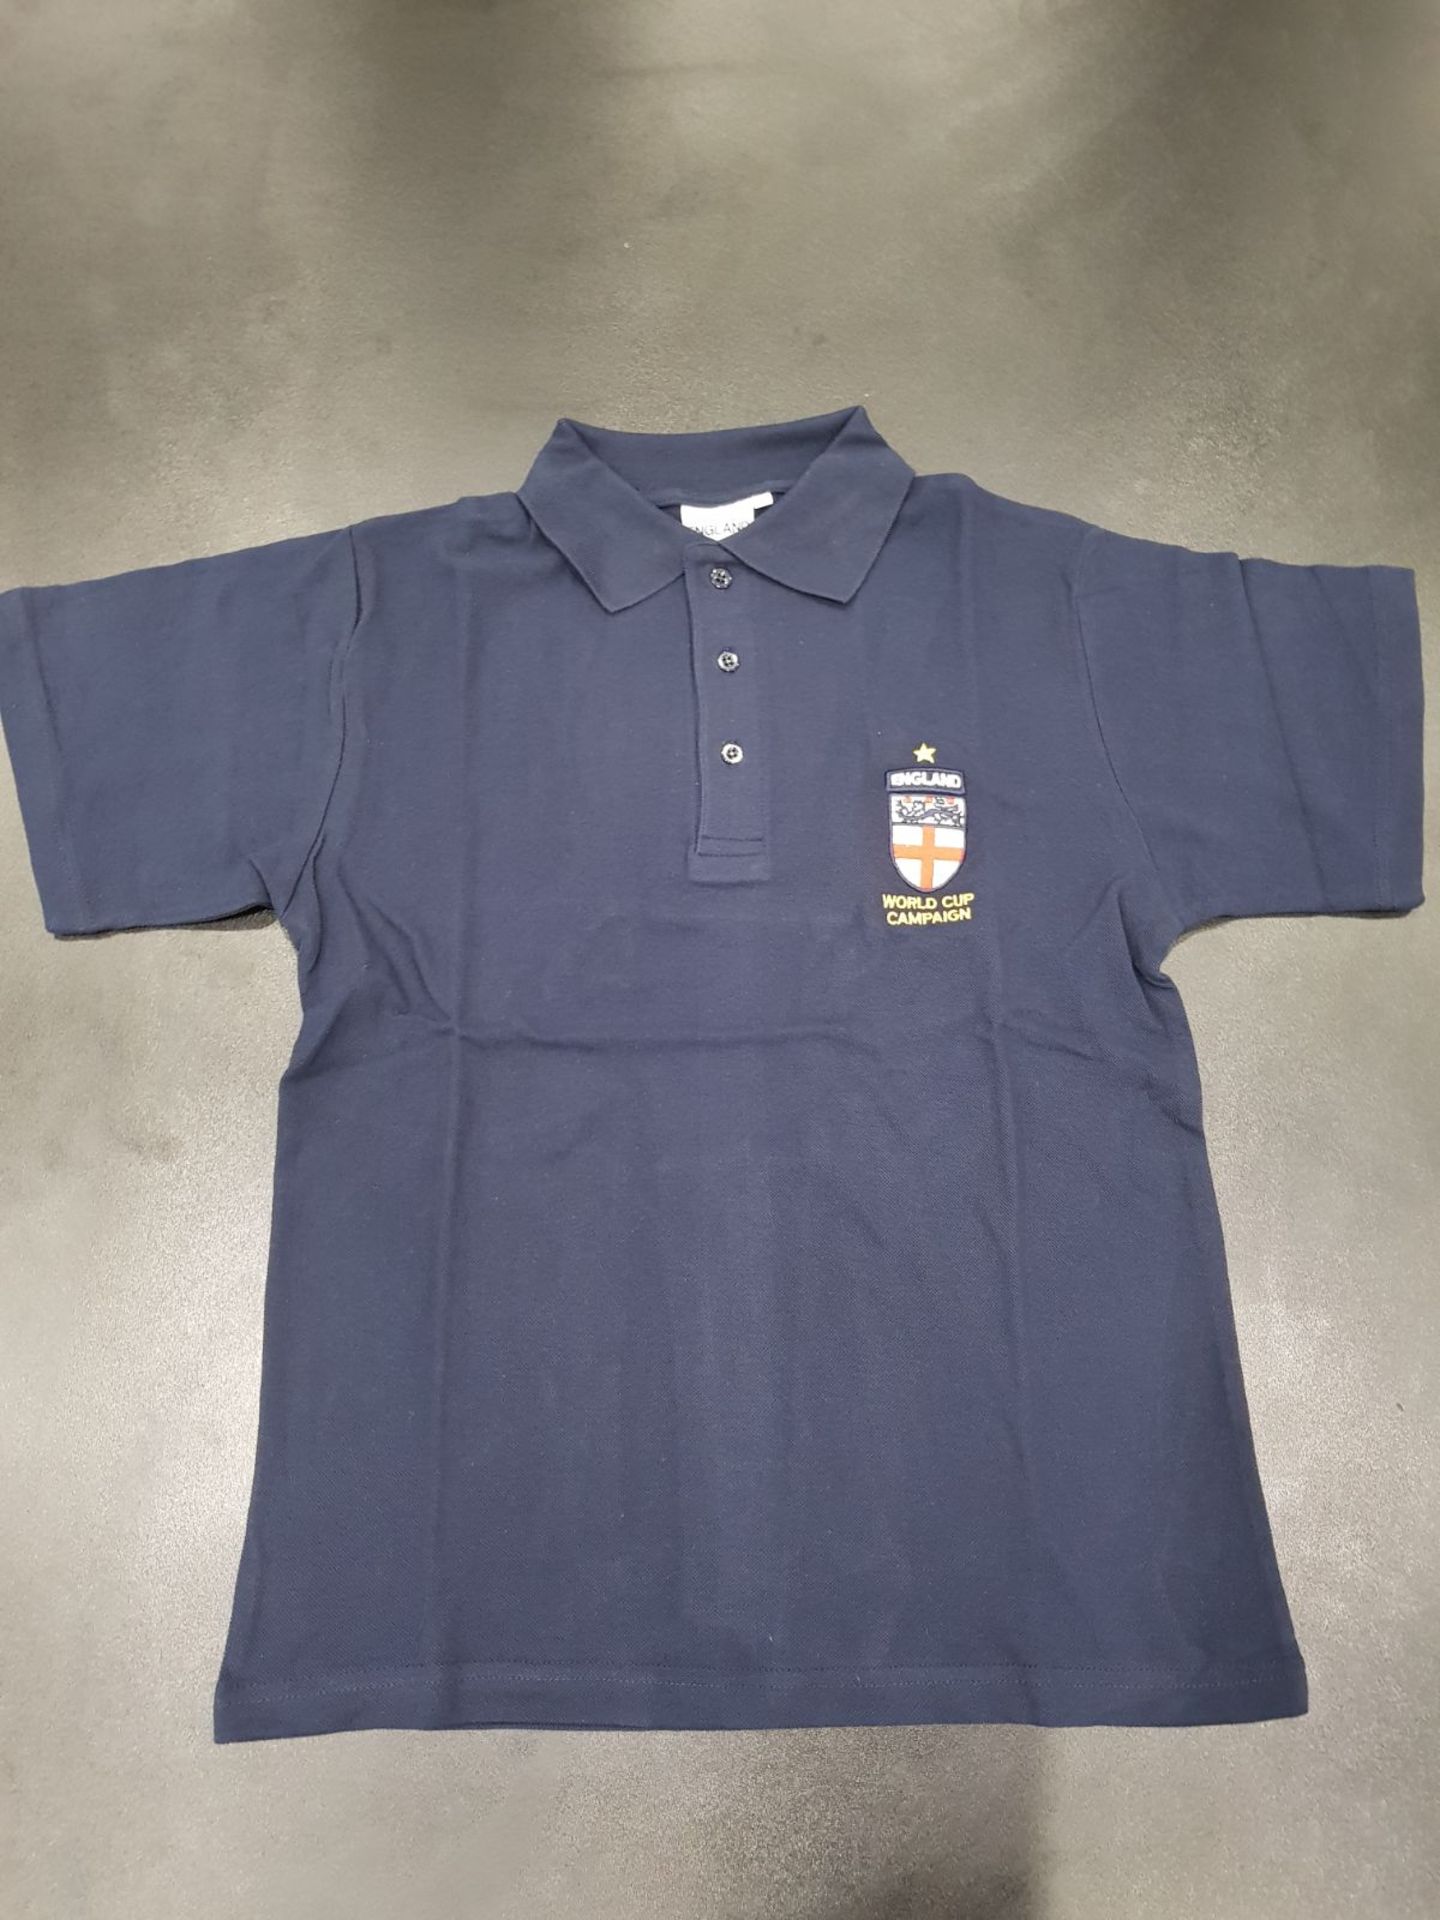 10 BRAND NEW ENGLAND WORLD CUP CAMPAIGN NAVY POLO SHIRTS SIZE XL